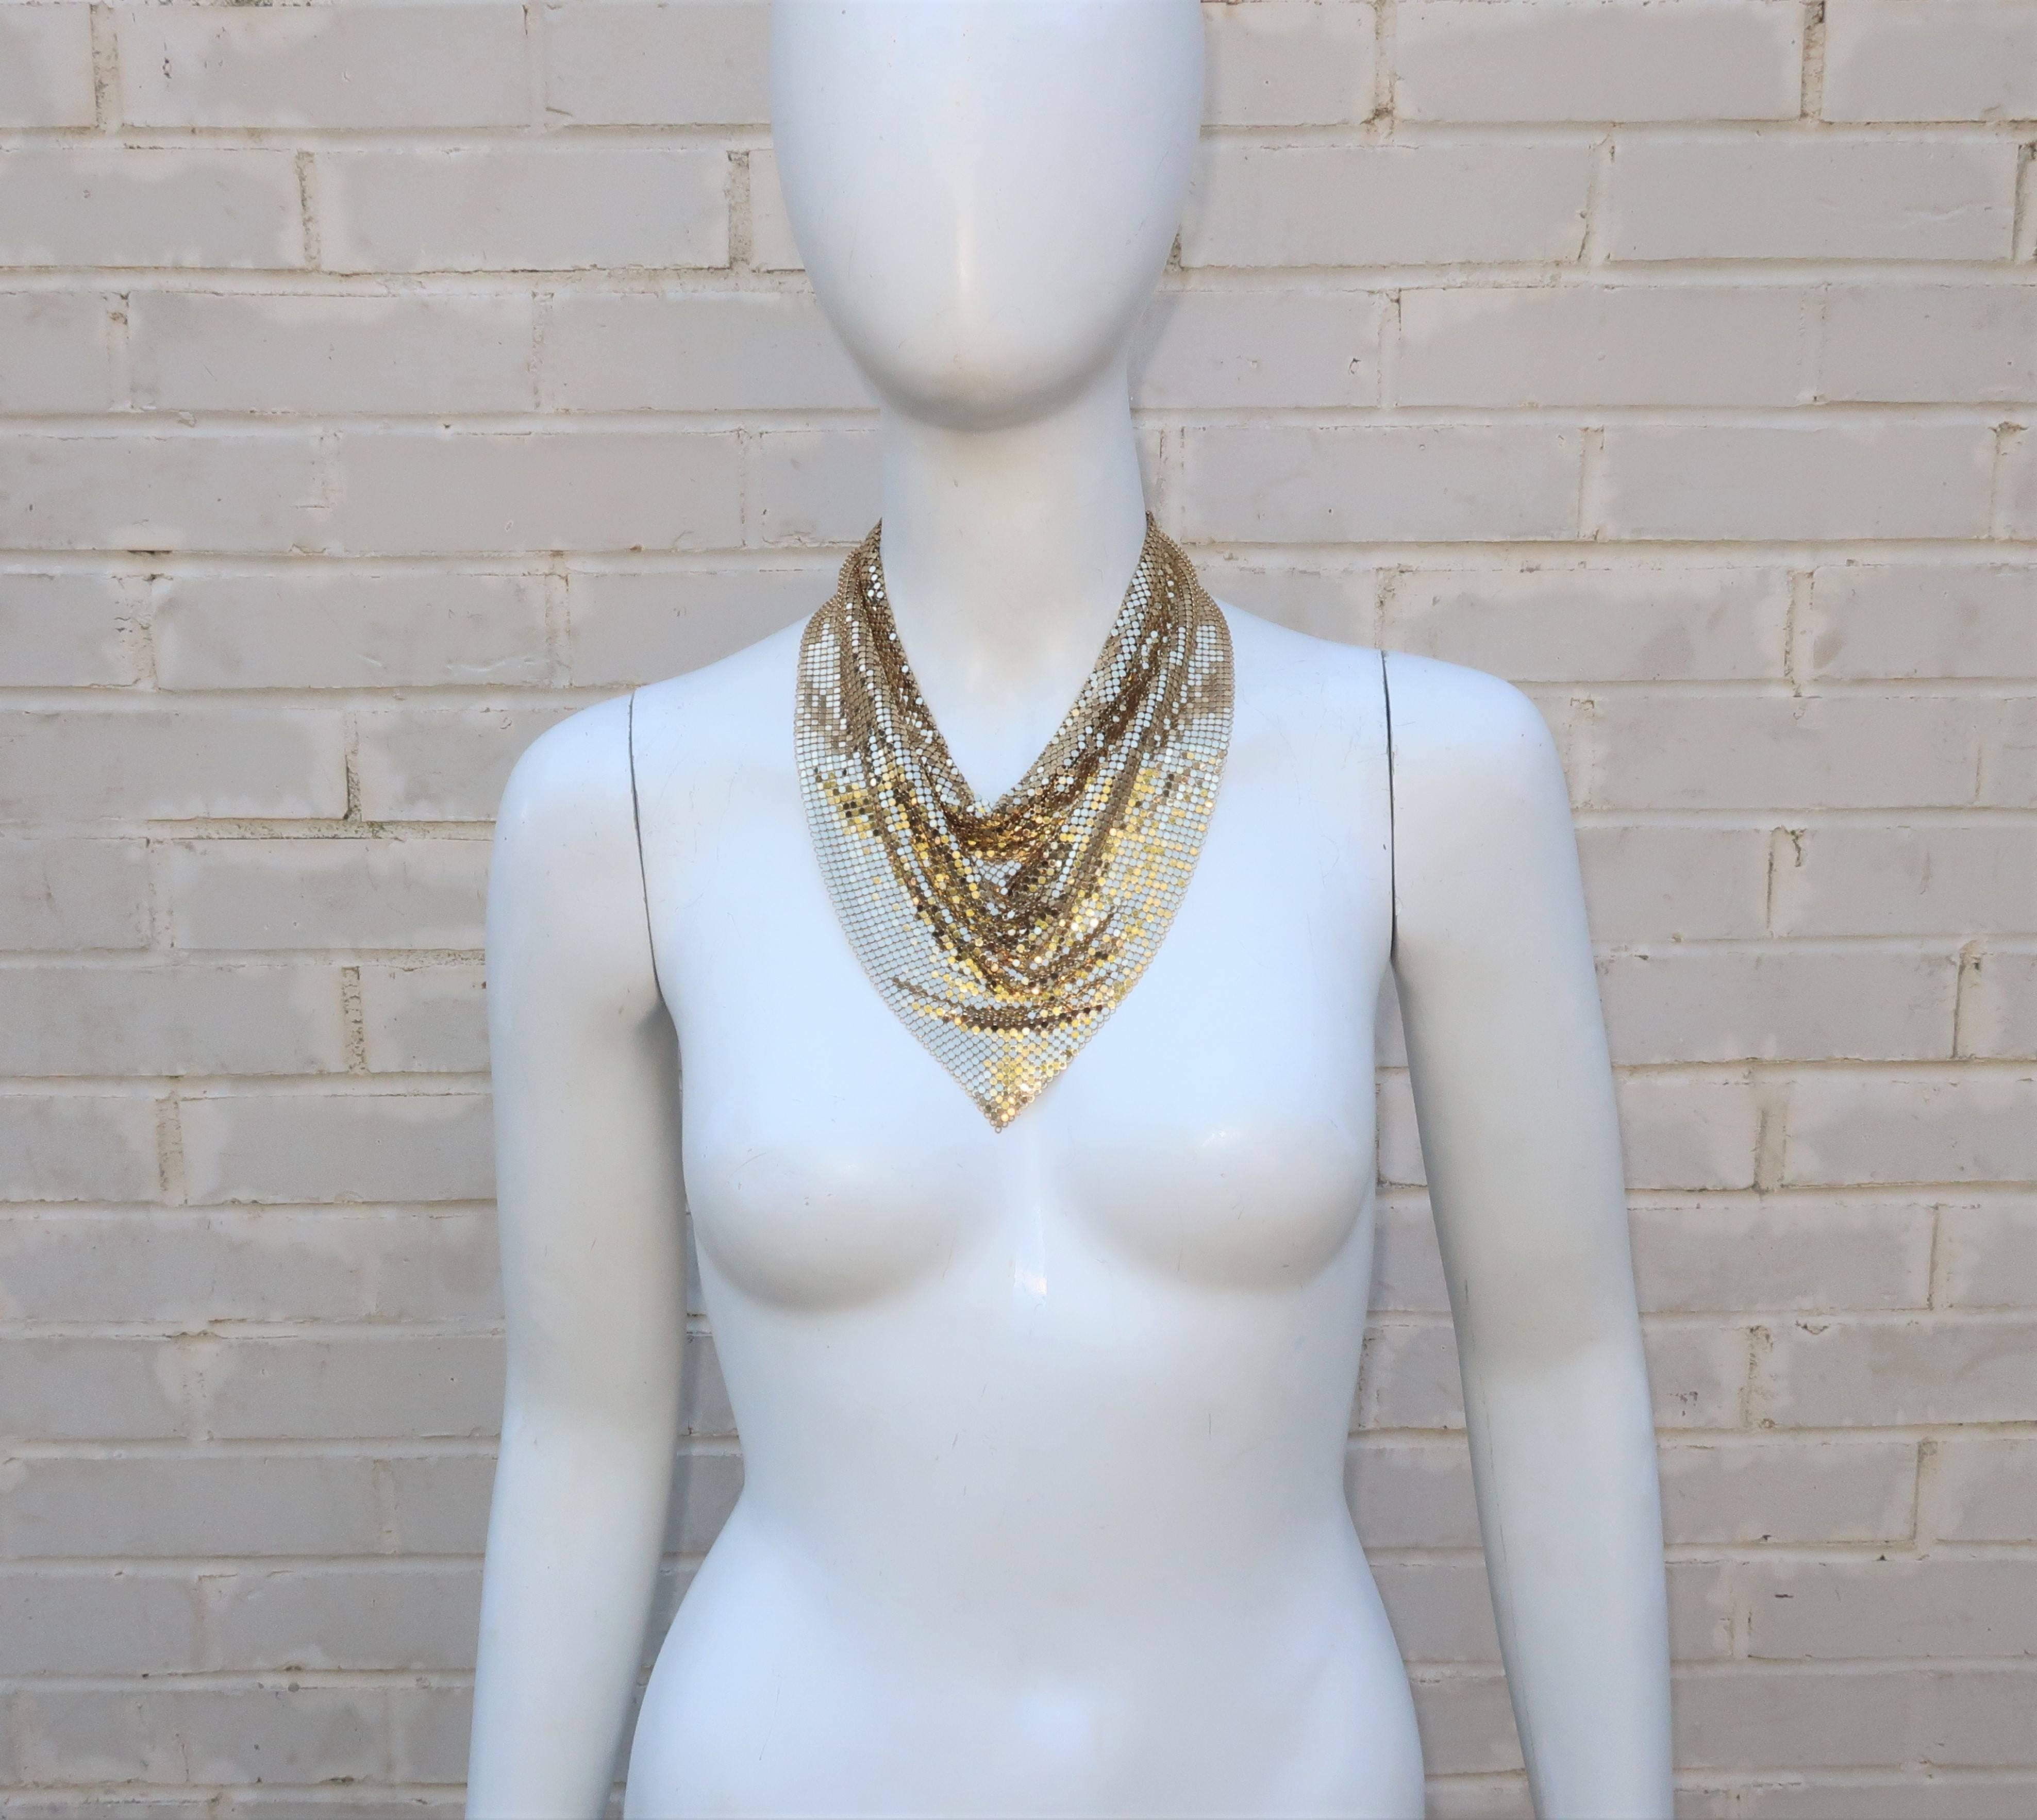 This 1970's gold chain mail bib necklace by Whiting & Davis is reminiscent of a neckerchief but instead of working the ranch ... you'll be working the disco dance floor!  The mesh 'fabric' is Whiting & Davis' signature material which harkens back to